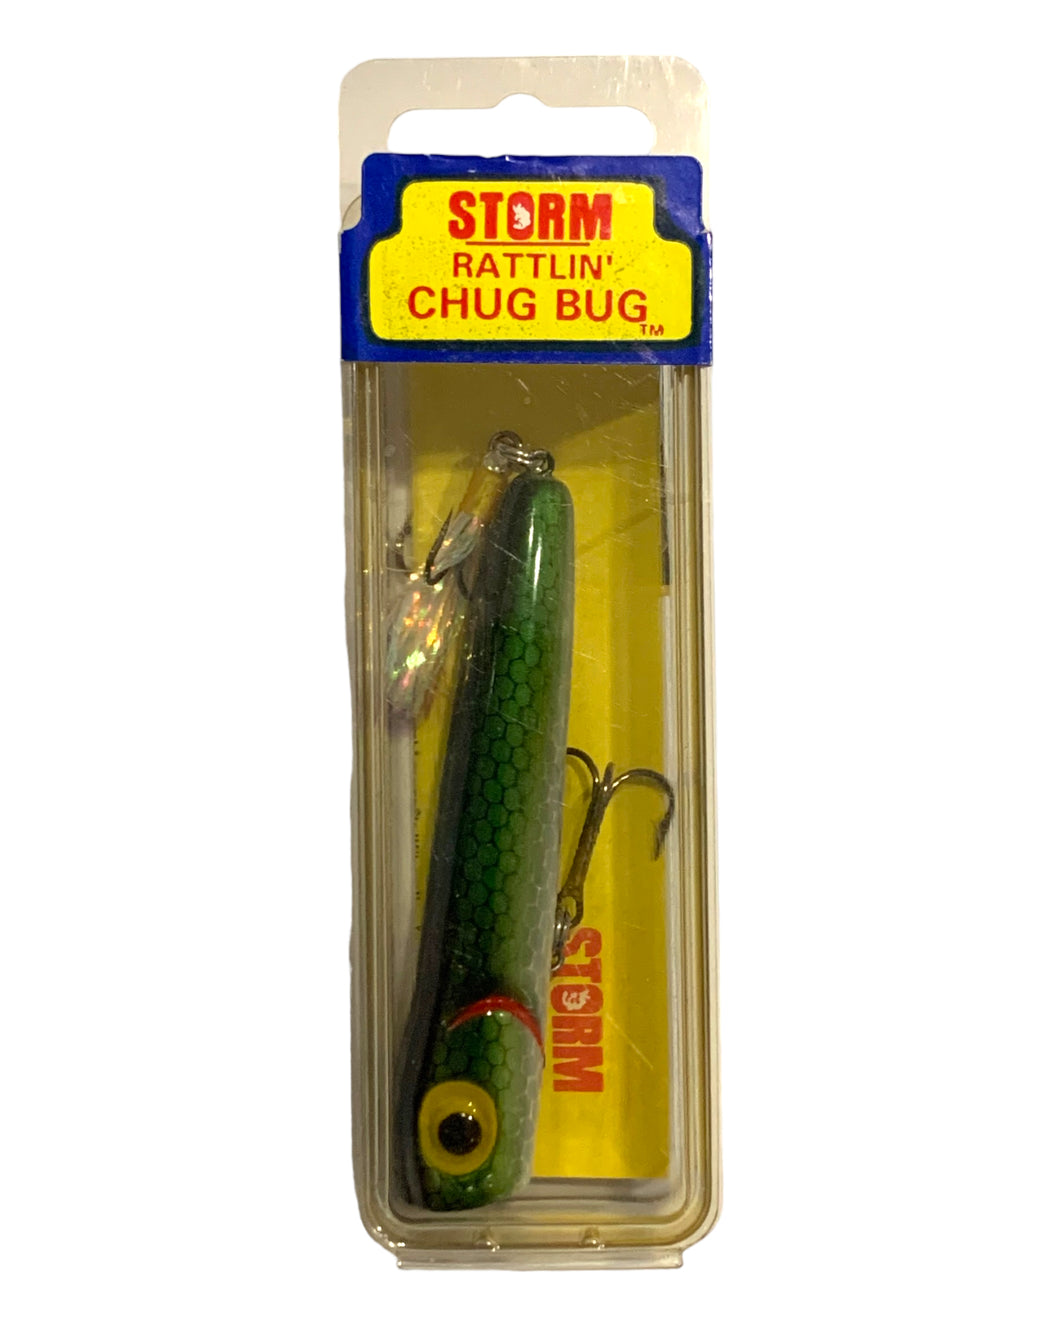 FRONT Package View of STORM MANUFACTURING COMPANY RATTLIN' CHUG BUG Fishing Lure • RAP6 GREEN SCALE